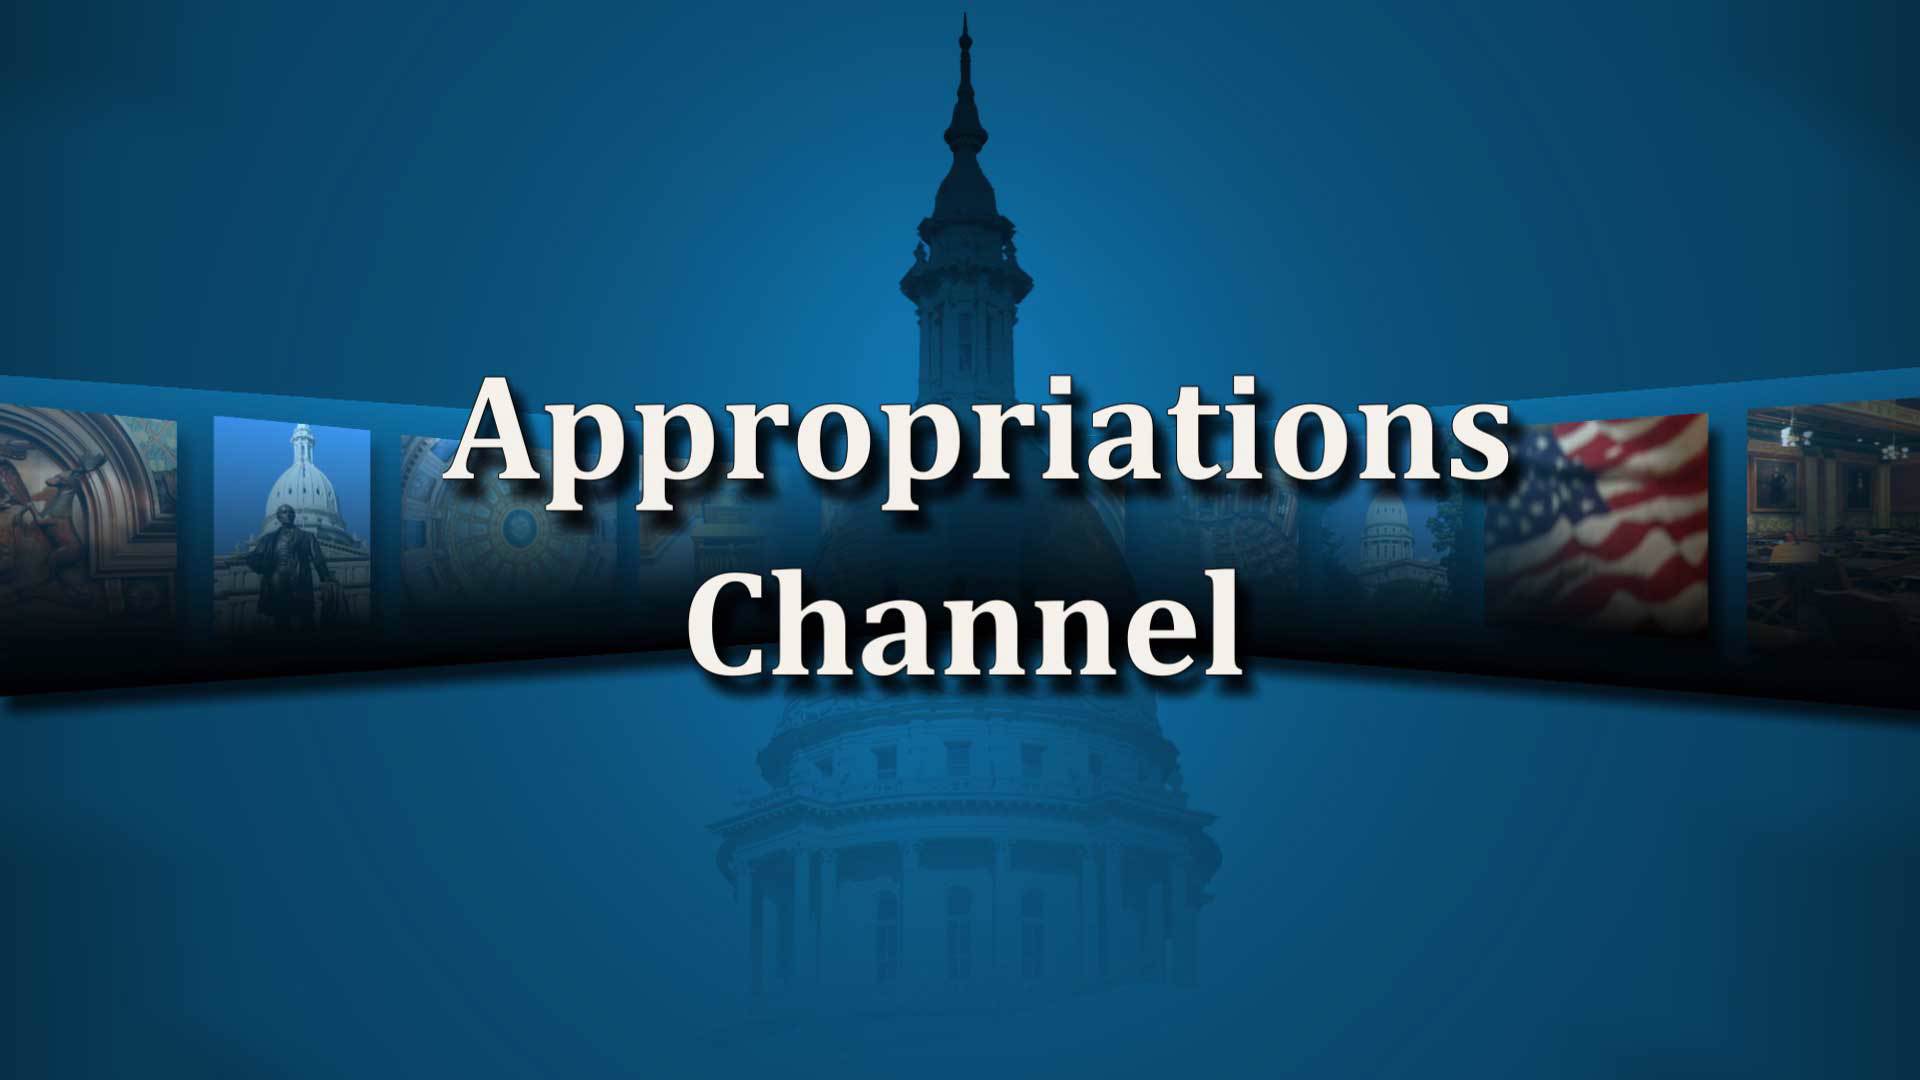 House Appropriations